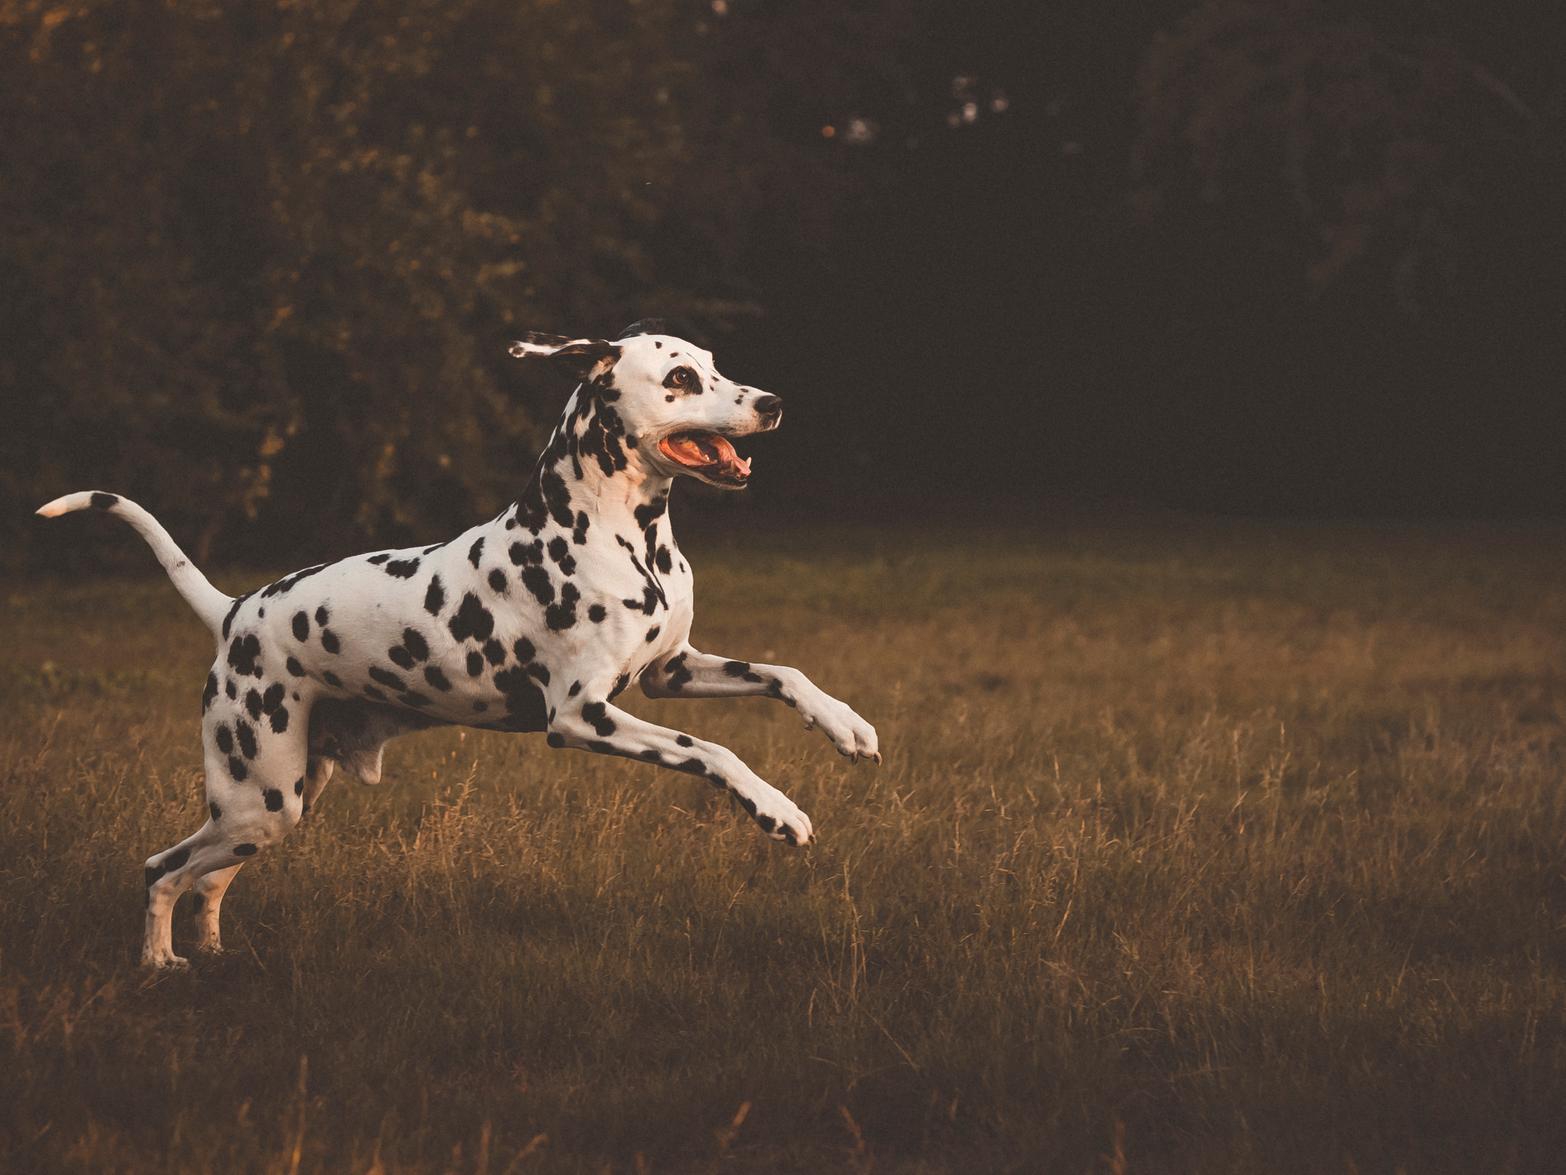 Dalmatians are loved by many, and take the 12th spot on the list for dog breeds most likely to misbehave at Christmas